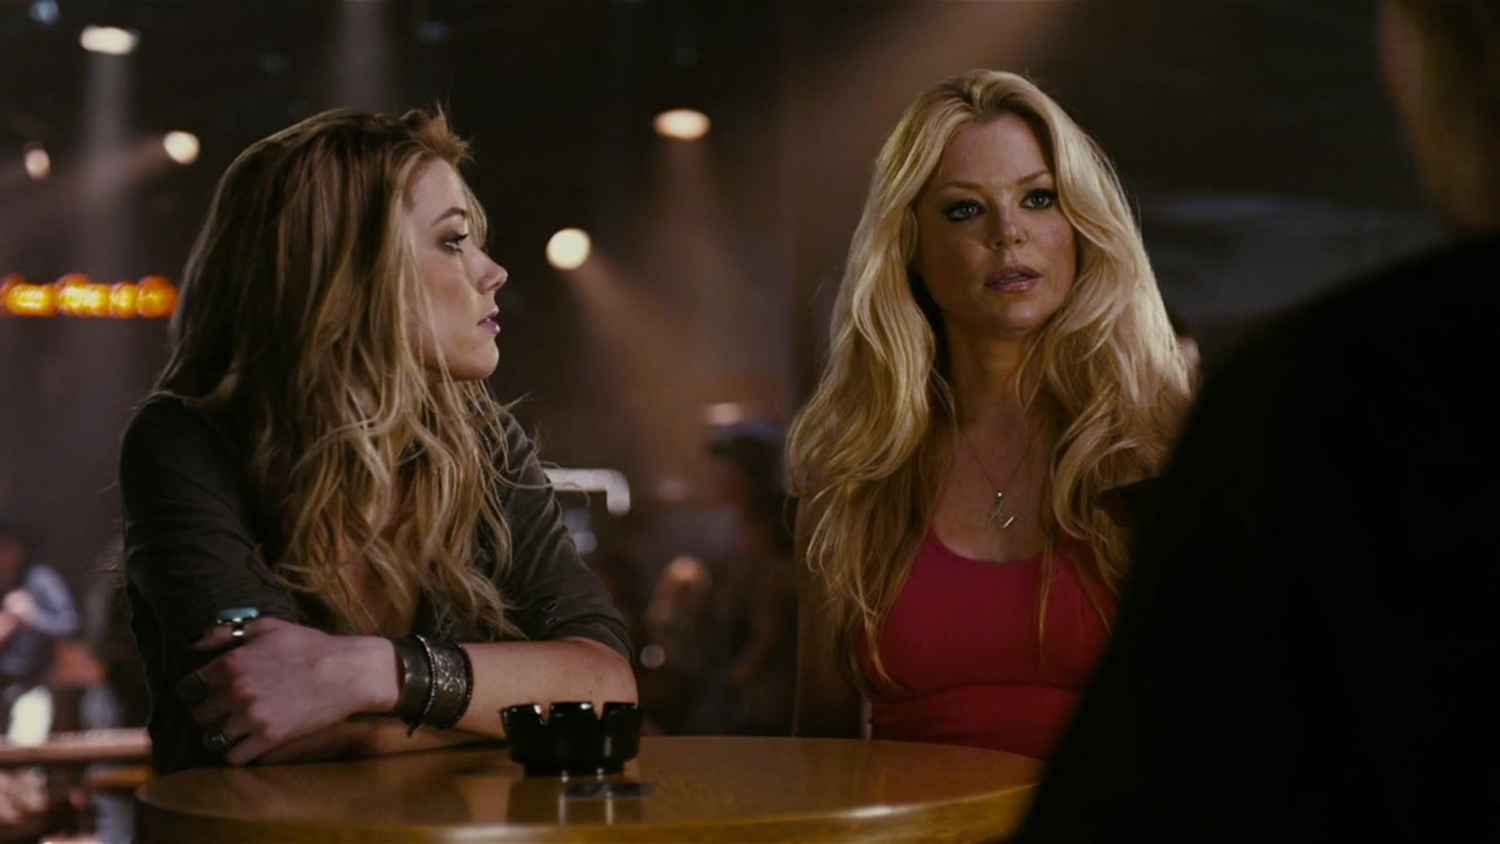 drive angry movie watch online